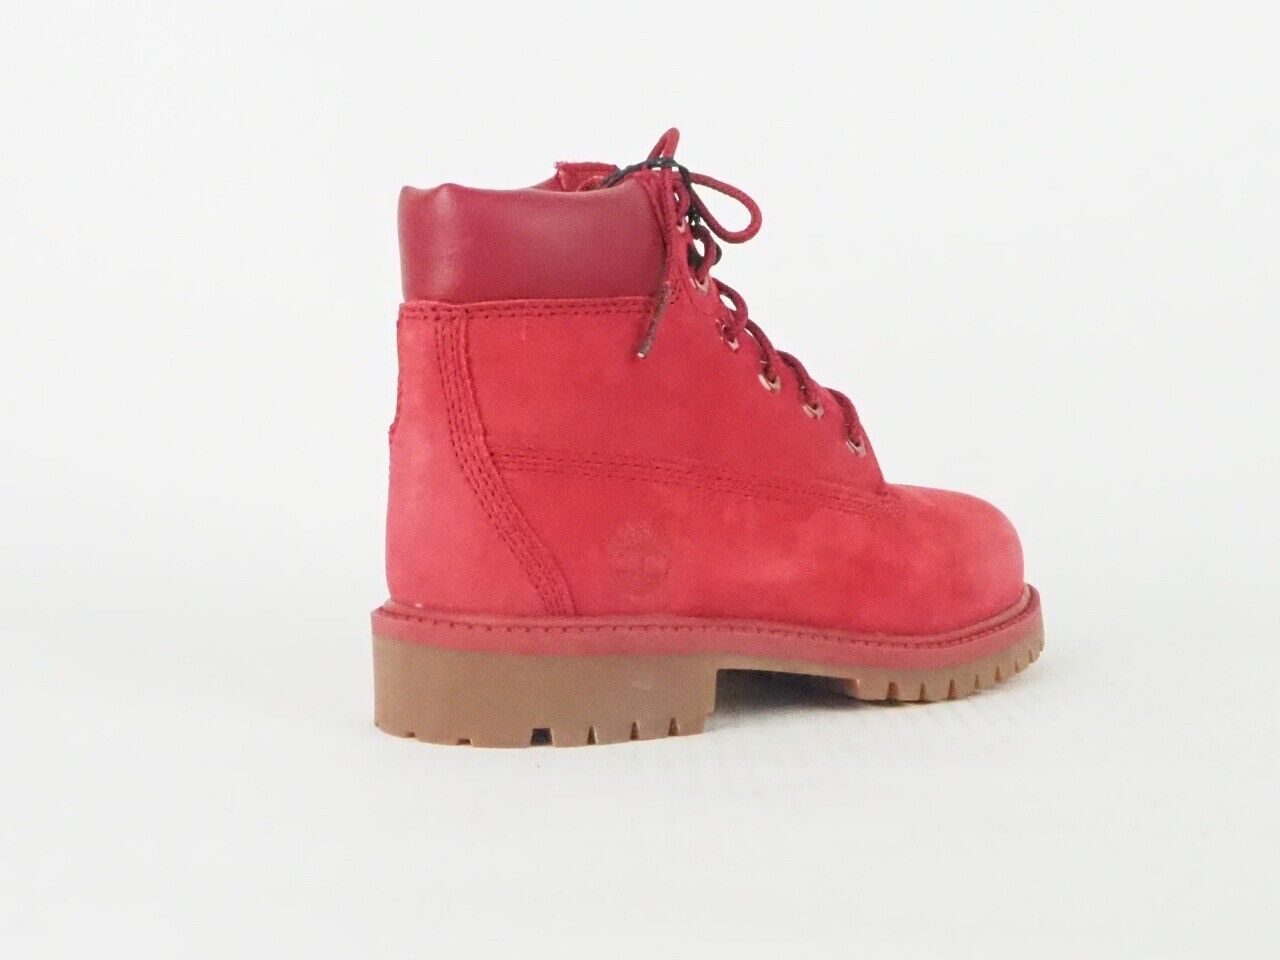 Unisex Timberland Classic Premium 6 Inch A14TE Red Leather Lace Waterproof Boots